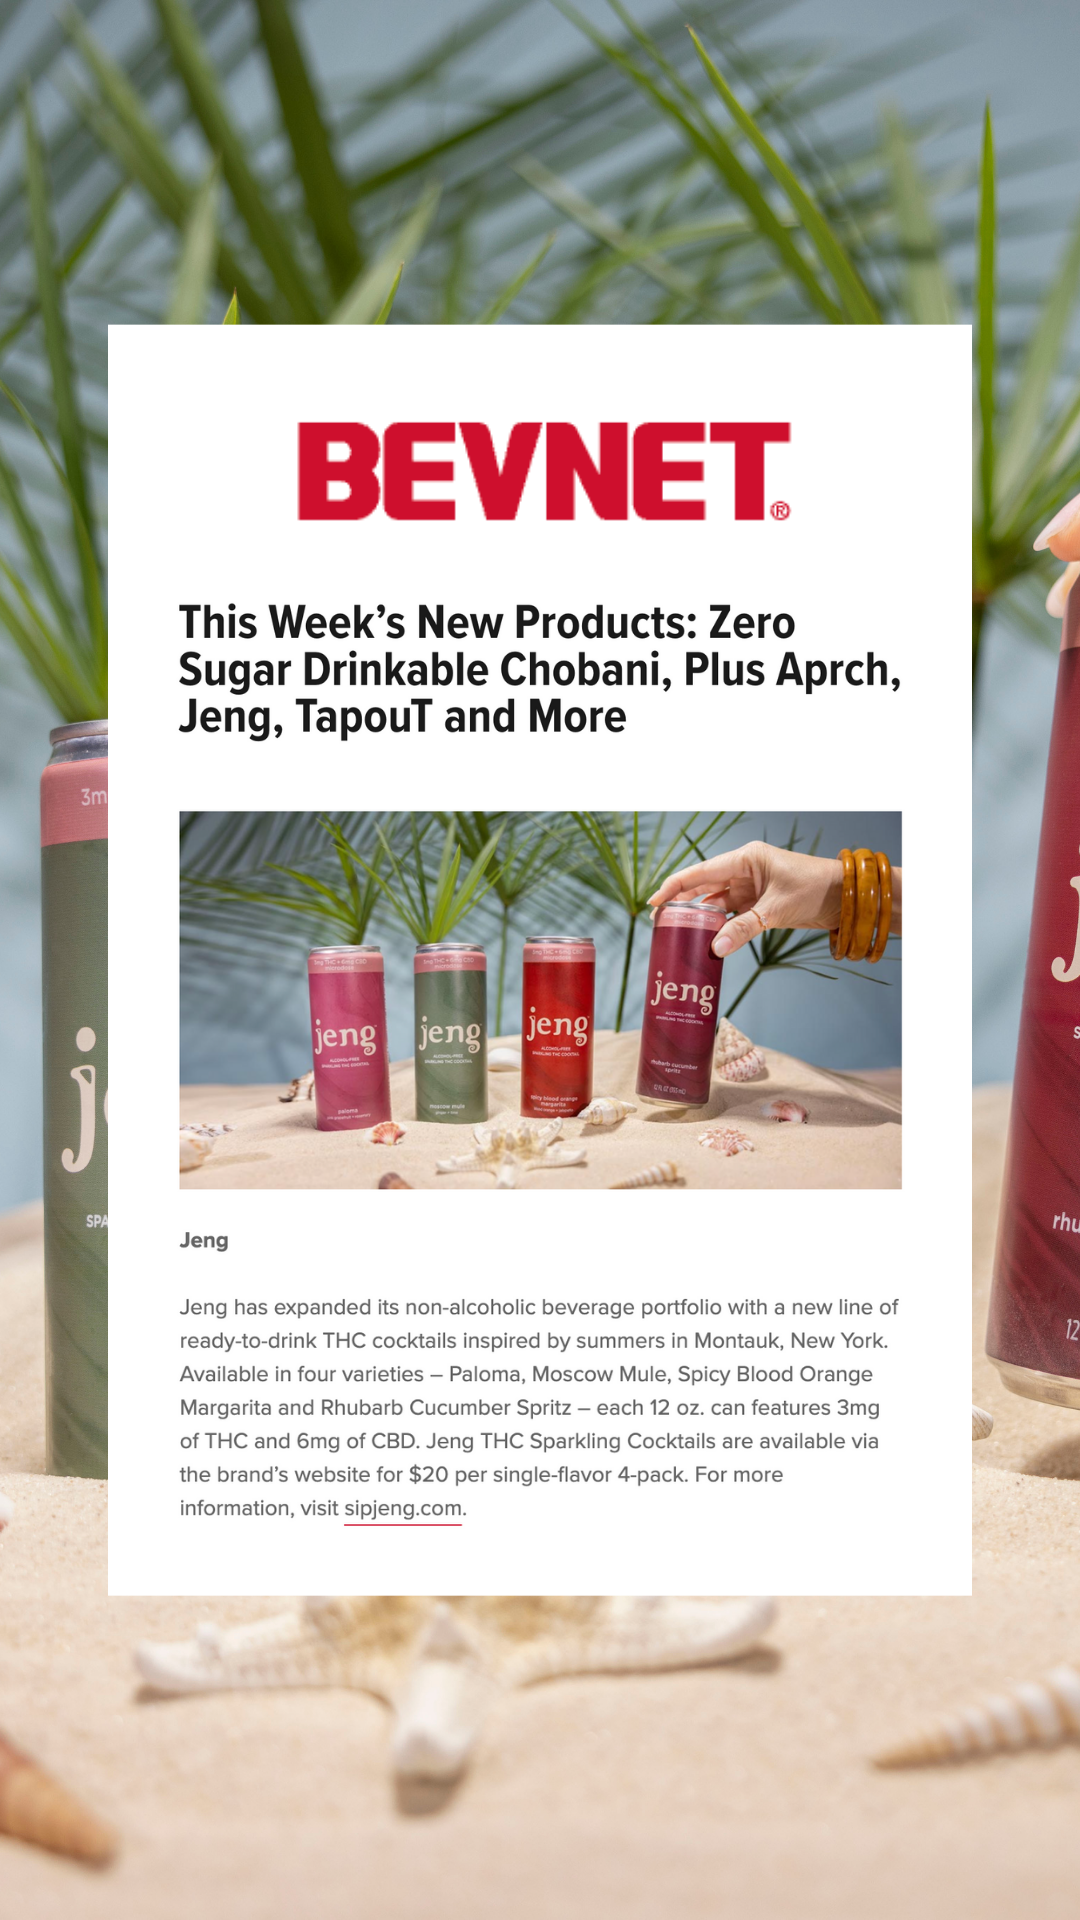 Jeng Featured in BEVNET's "This Week's New Products"